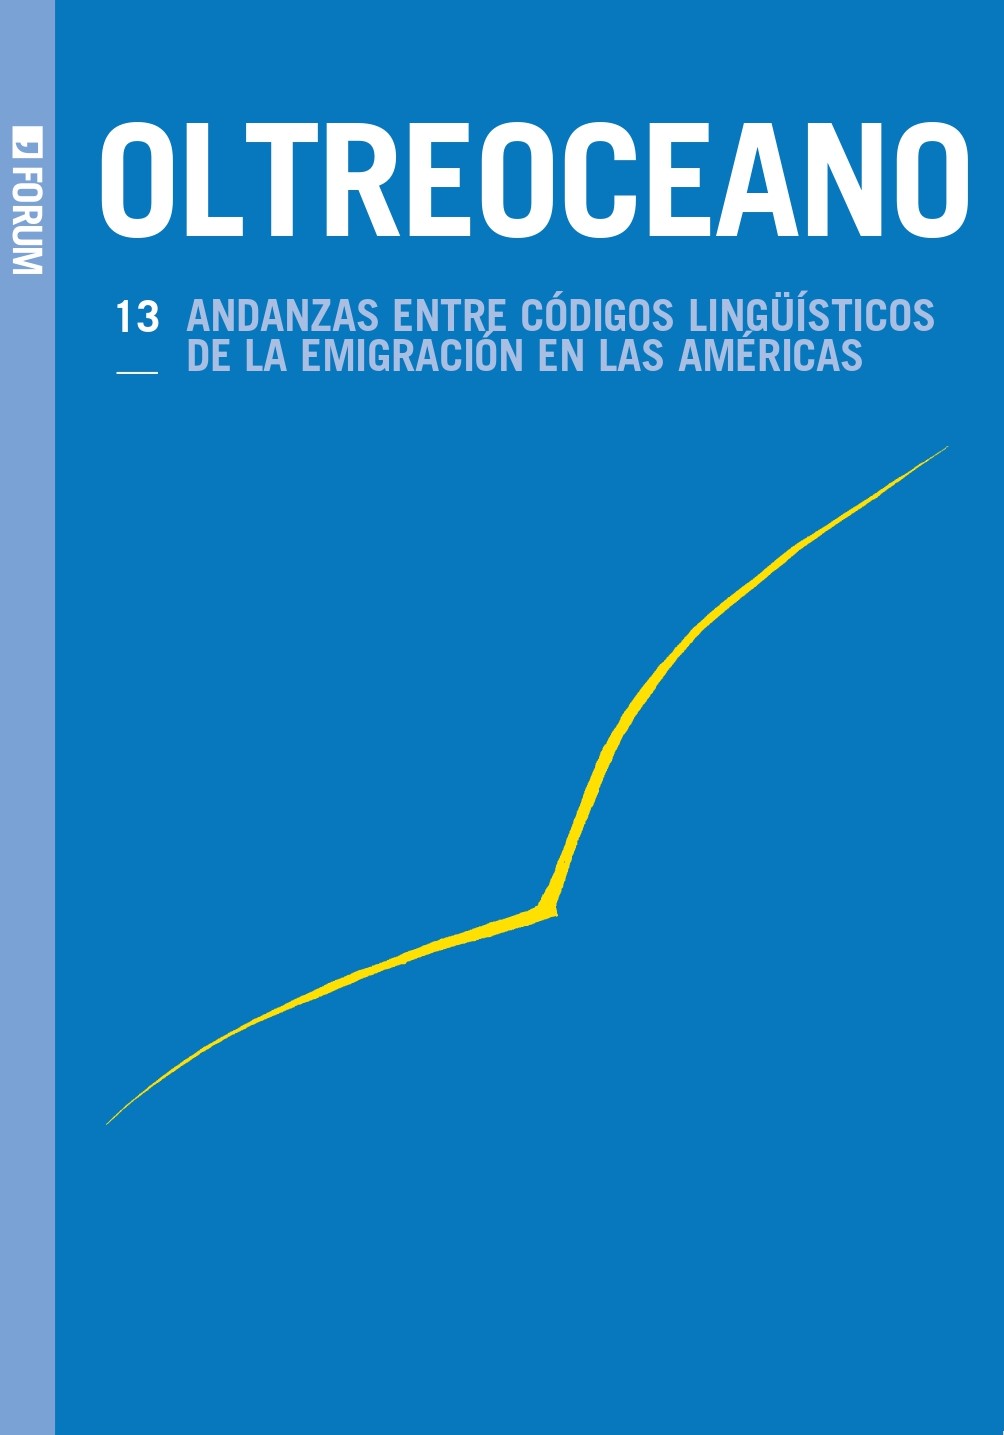 					View No. 13 (2017): The Linguistic Codes of Emigration in the Americas
				